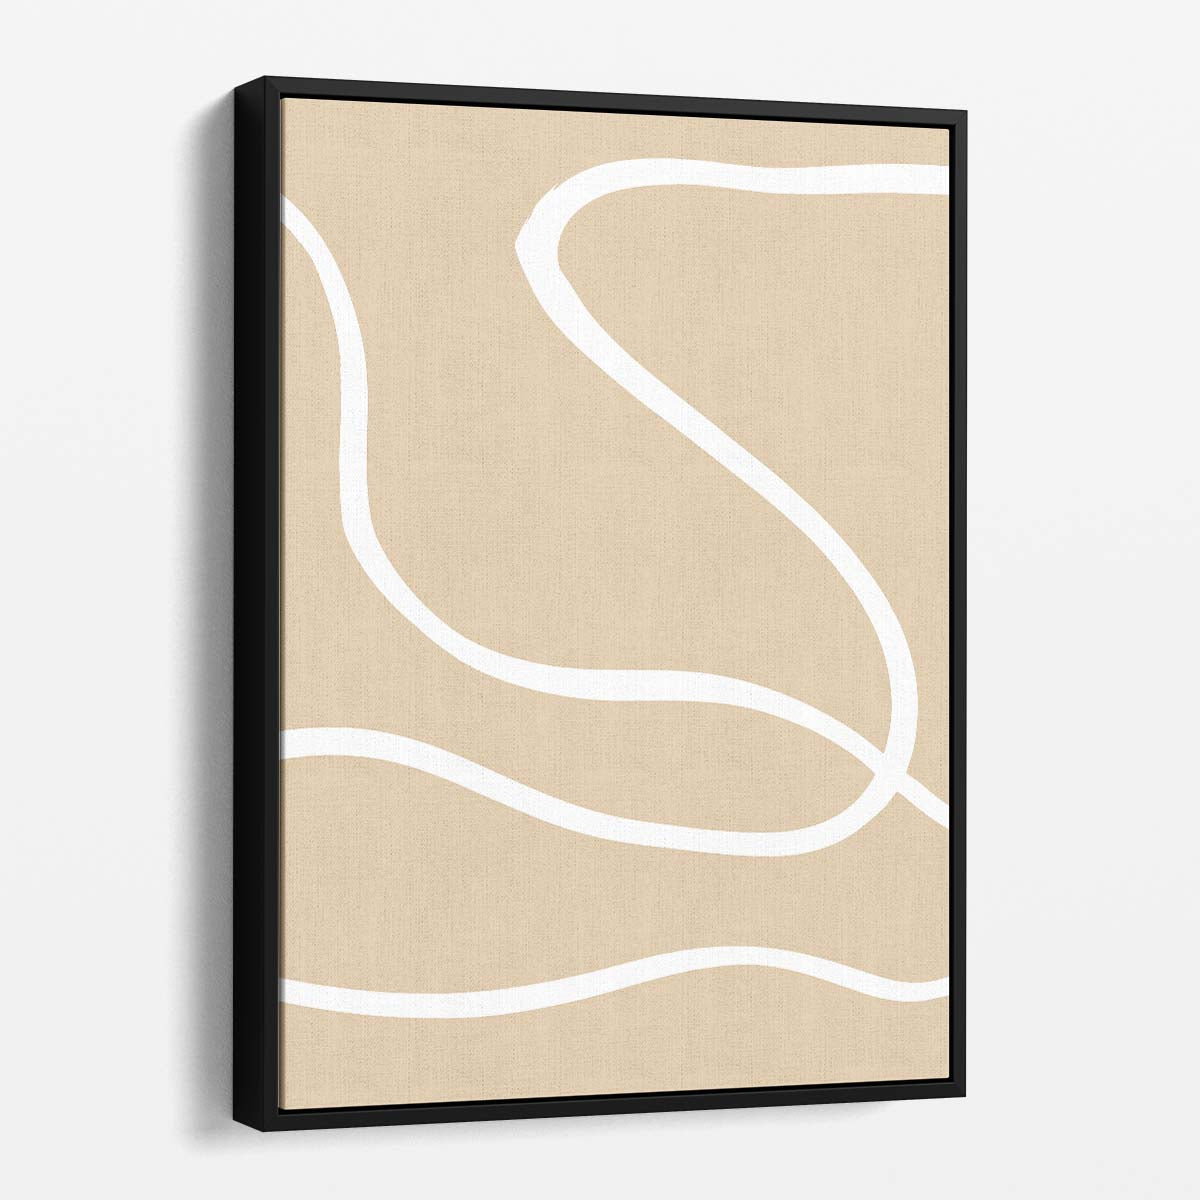 Minimalist Beige Line Art Illustration - Simple Abstract Minimalism by Luxuriance Designs, made in USA